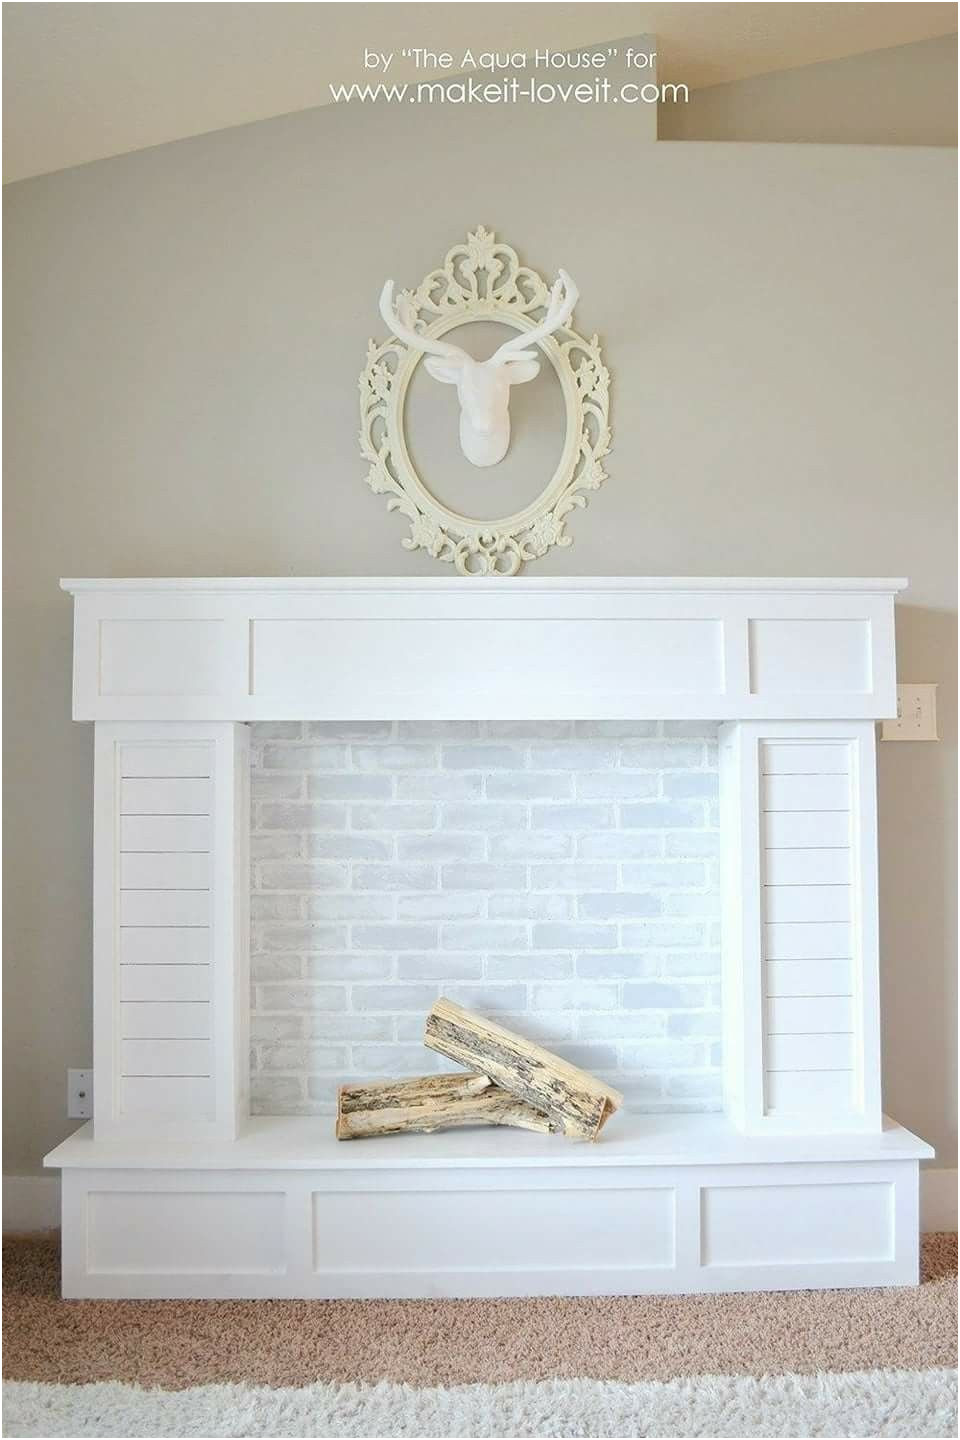 Best Of Candles In the Fireplace Ideas